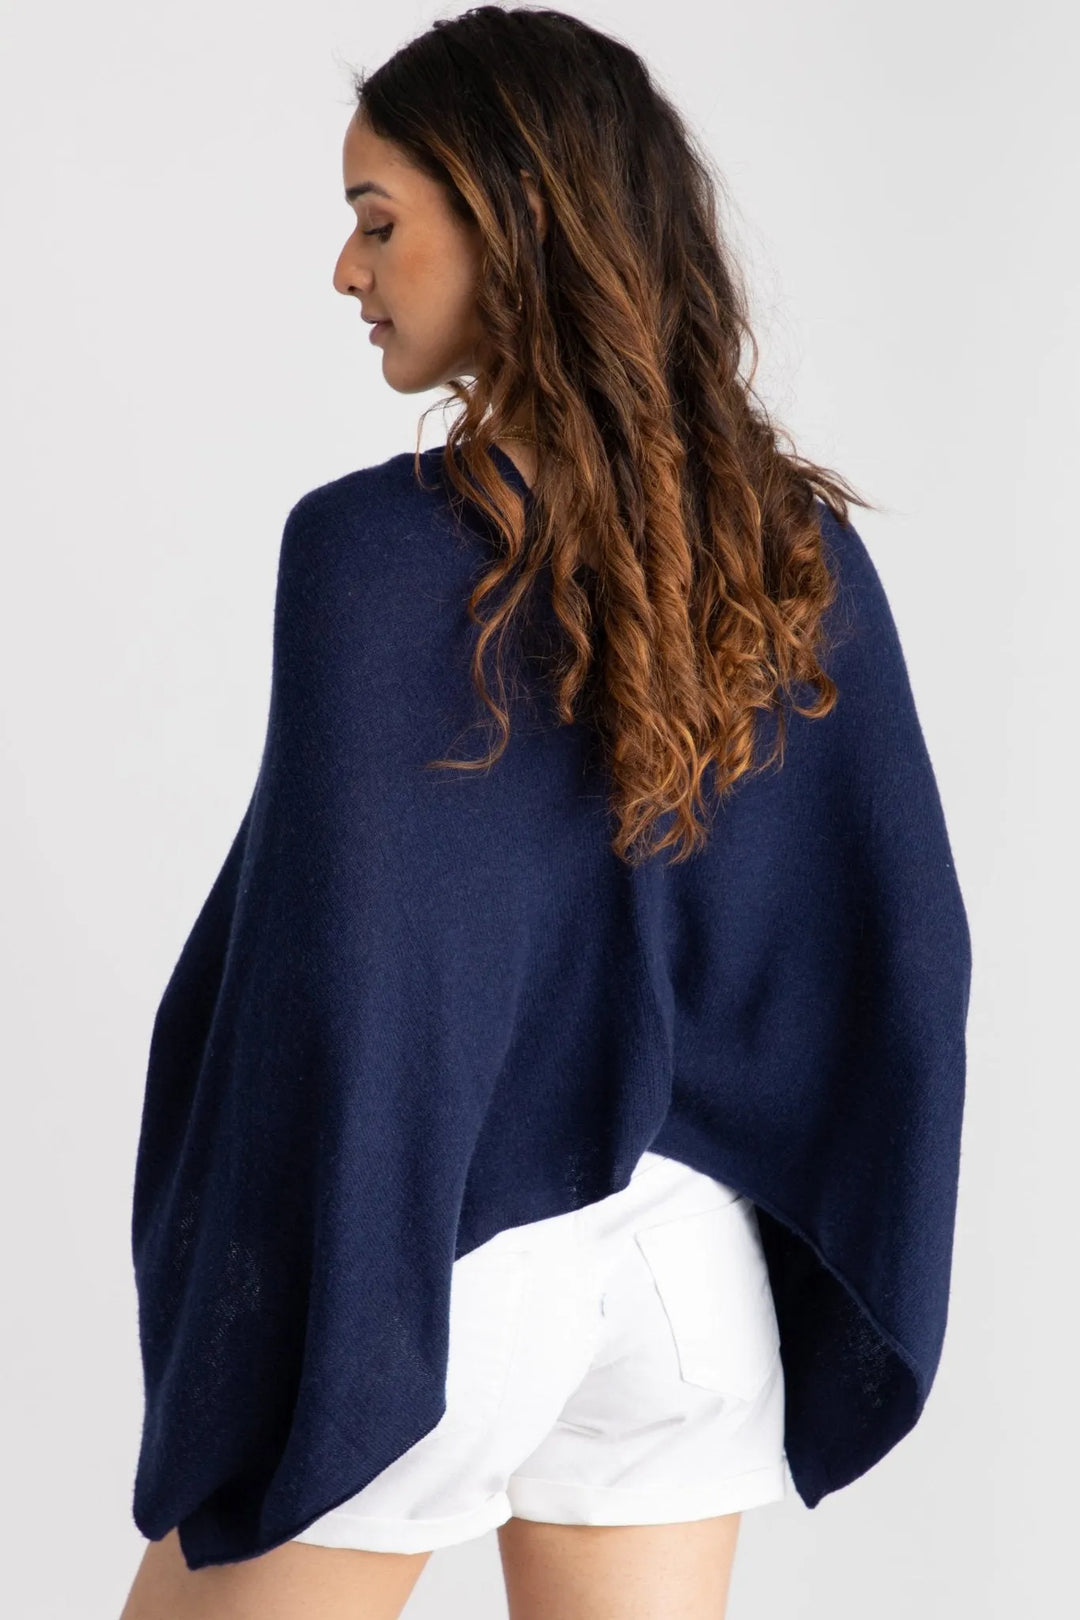 Heart Cashmere and Silk Poncho Midnight Blue